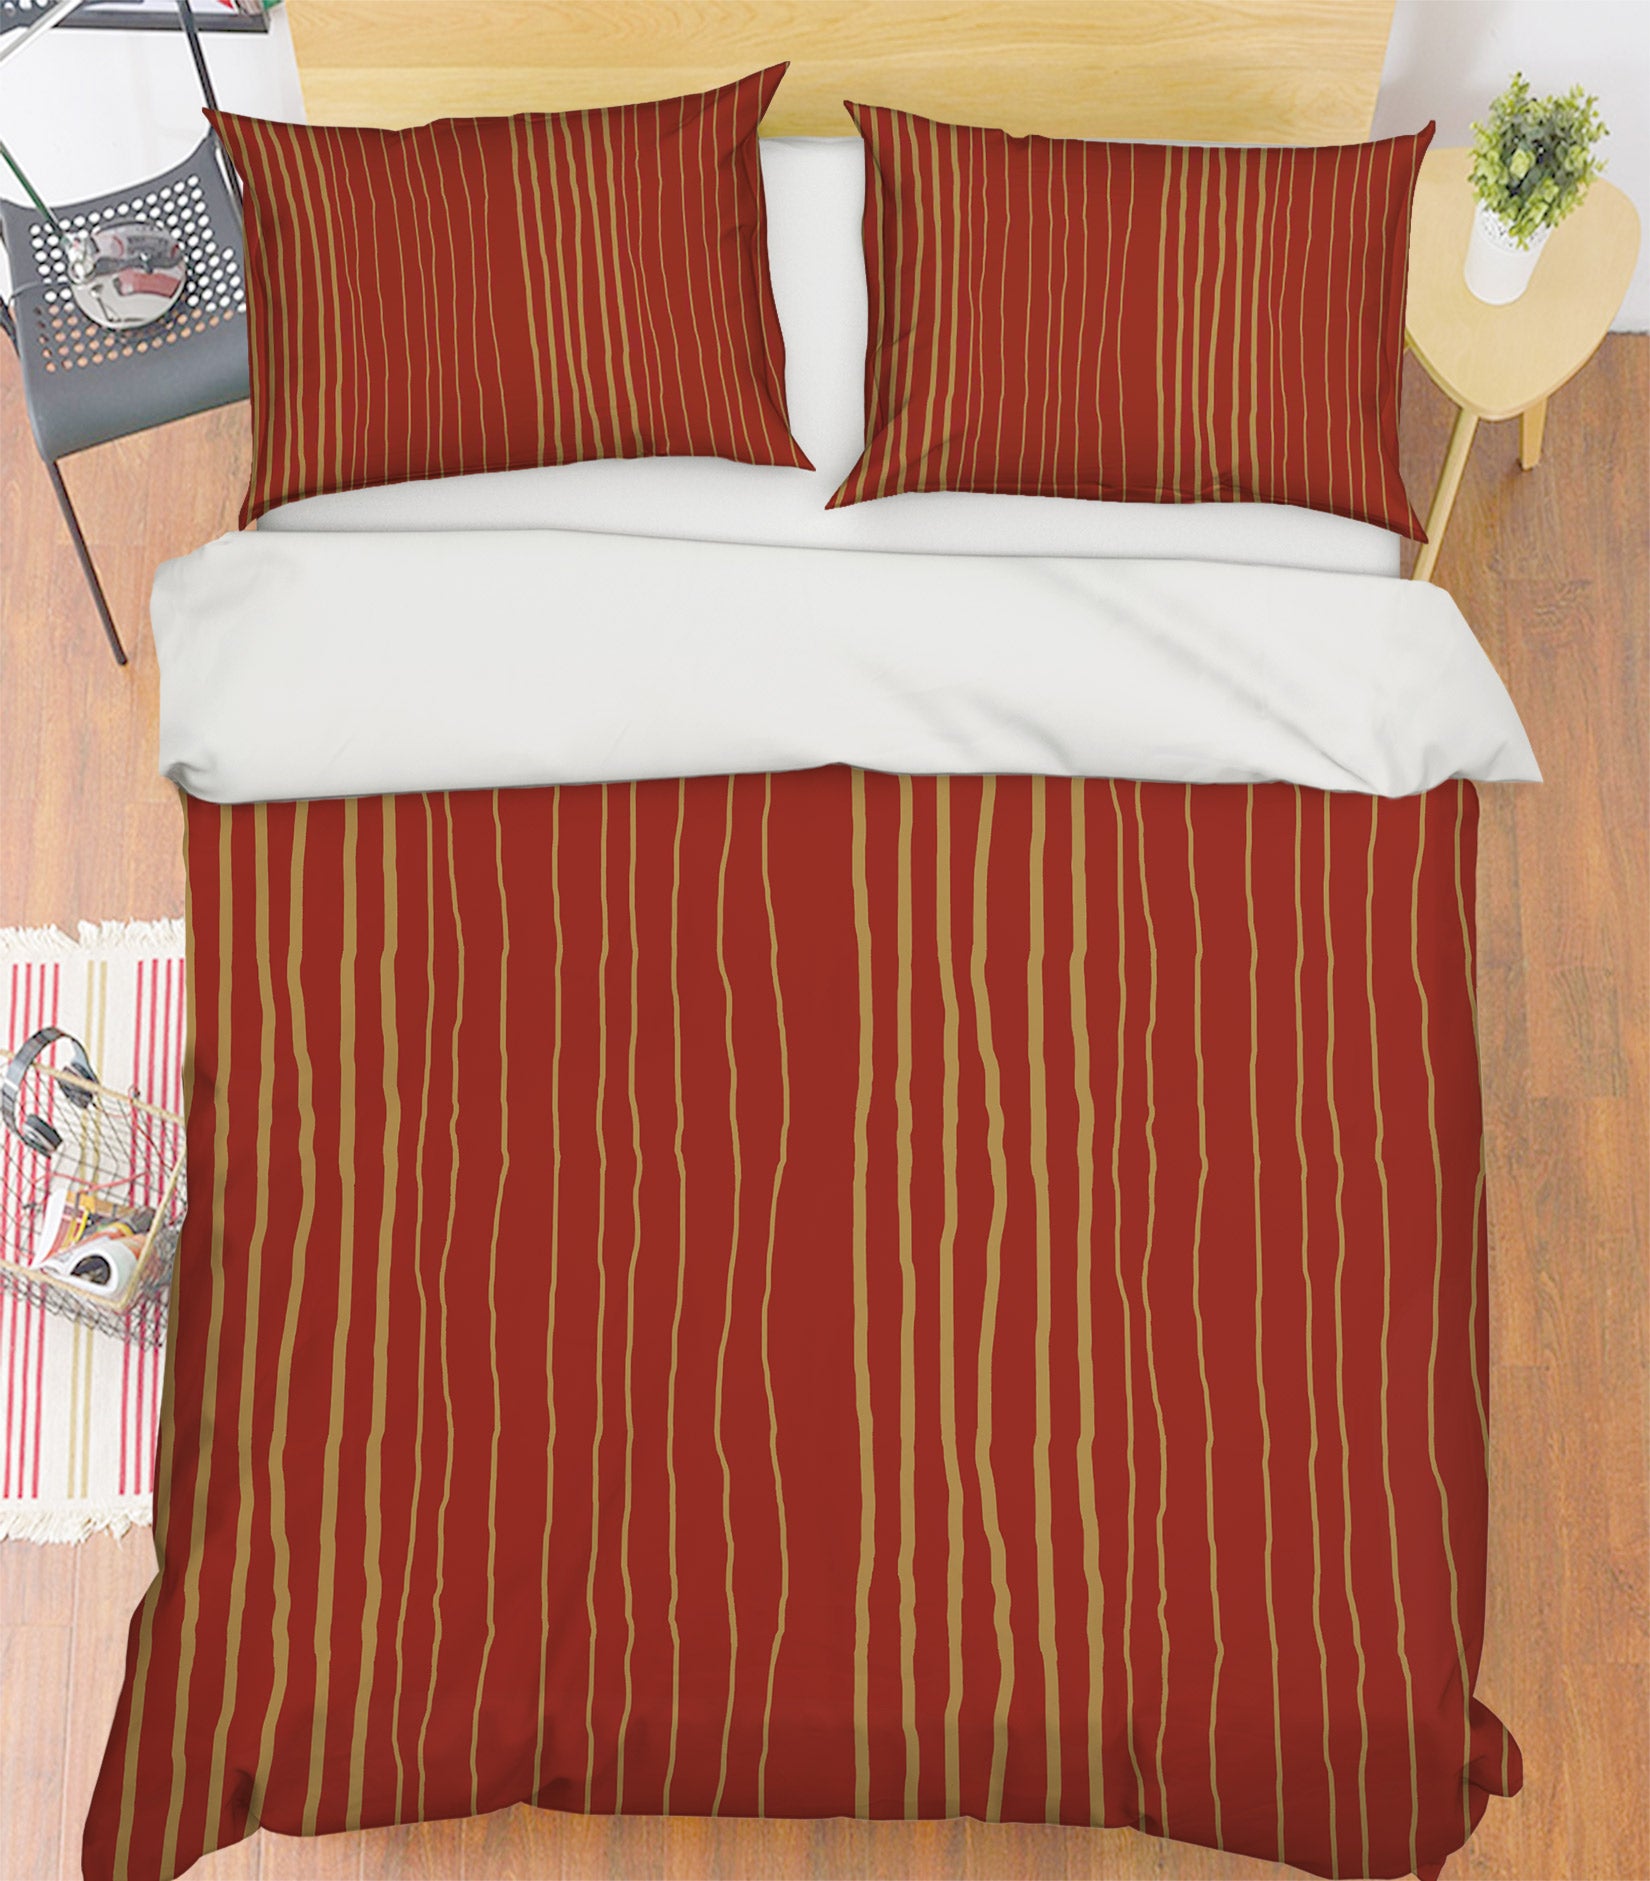 3D Red Yellow Stripes 98155 Kasumi Loffler Bedding Bed Pillowcases Quilt